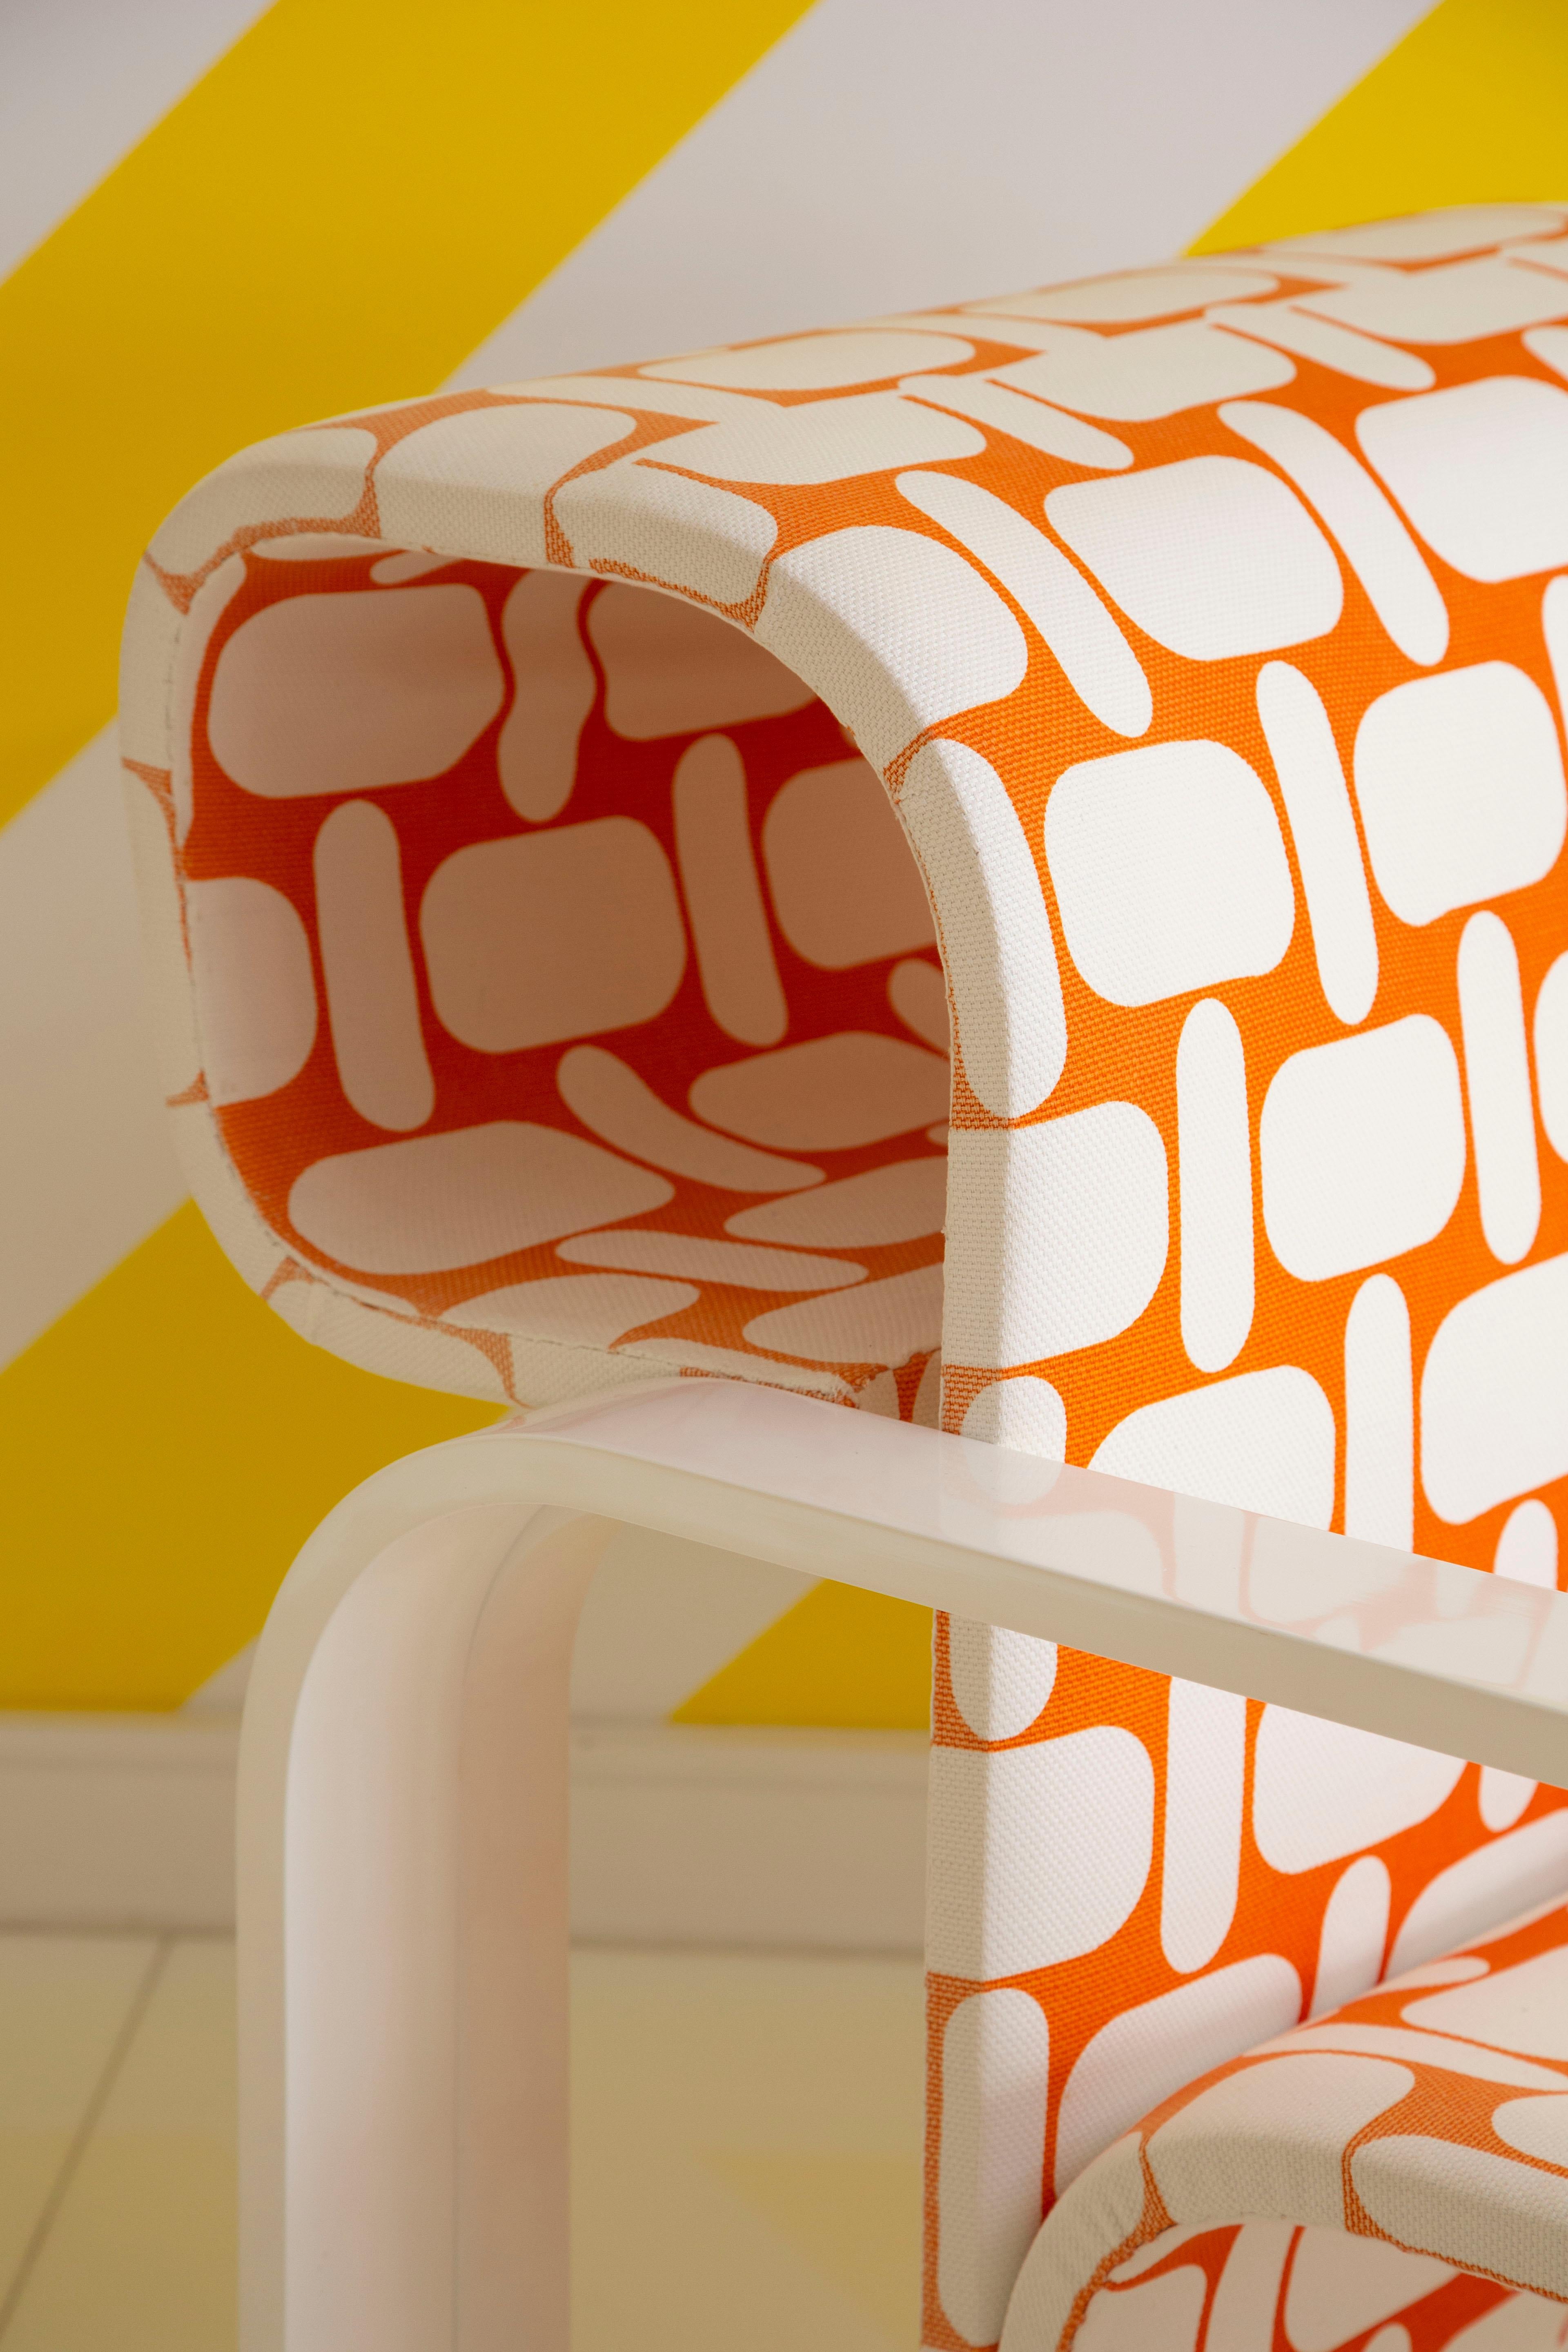 Pair of white framed armchairs with orange print fabric. Designed by award-winning architect Jan Bocan.
 